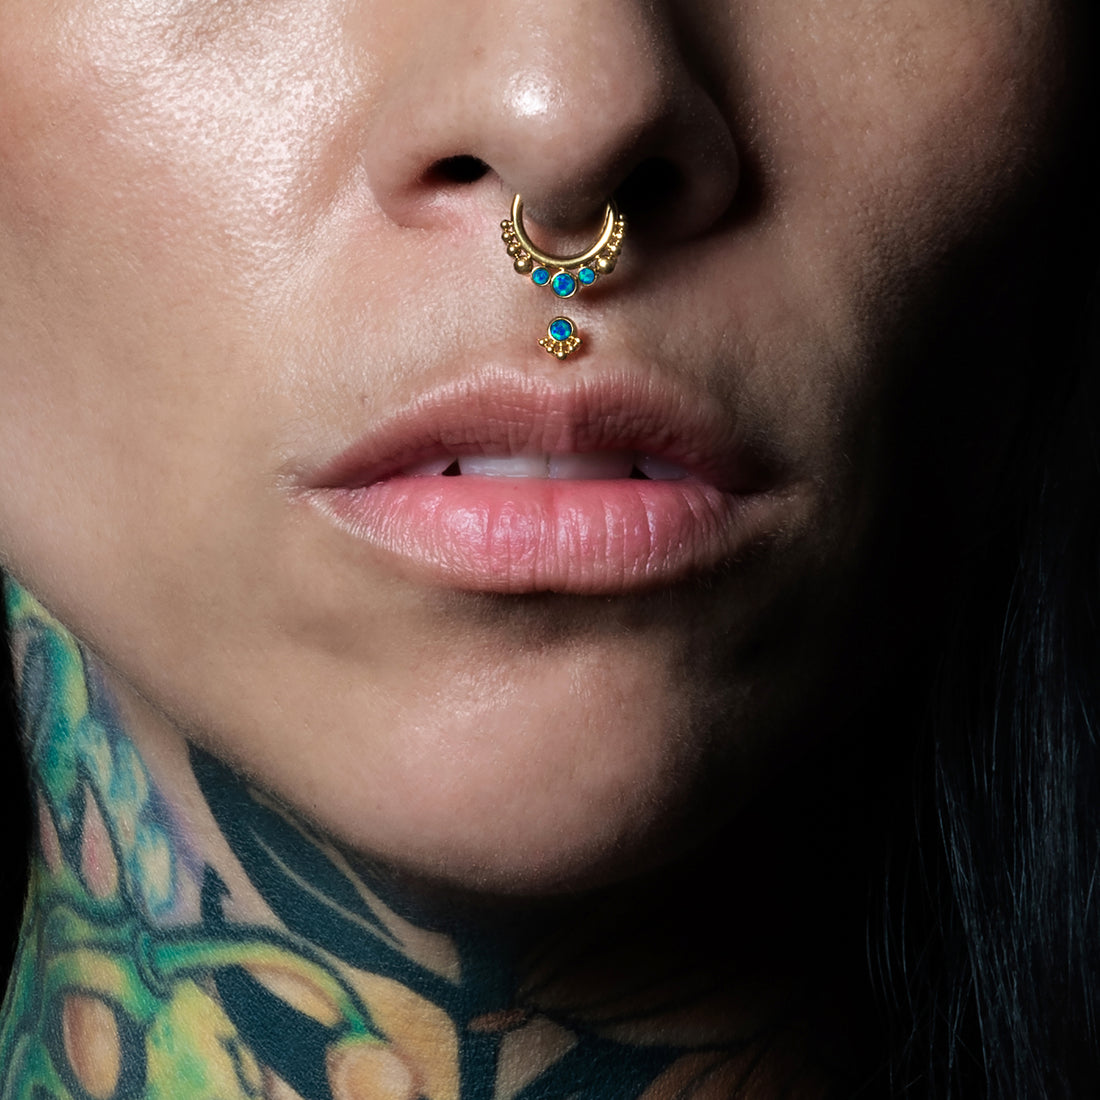 model wearing Golden Siti Clicker Ring with Blue Opal and Layla medusa labret